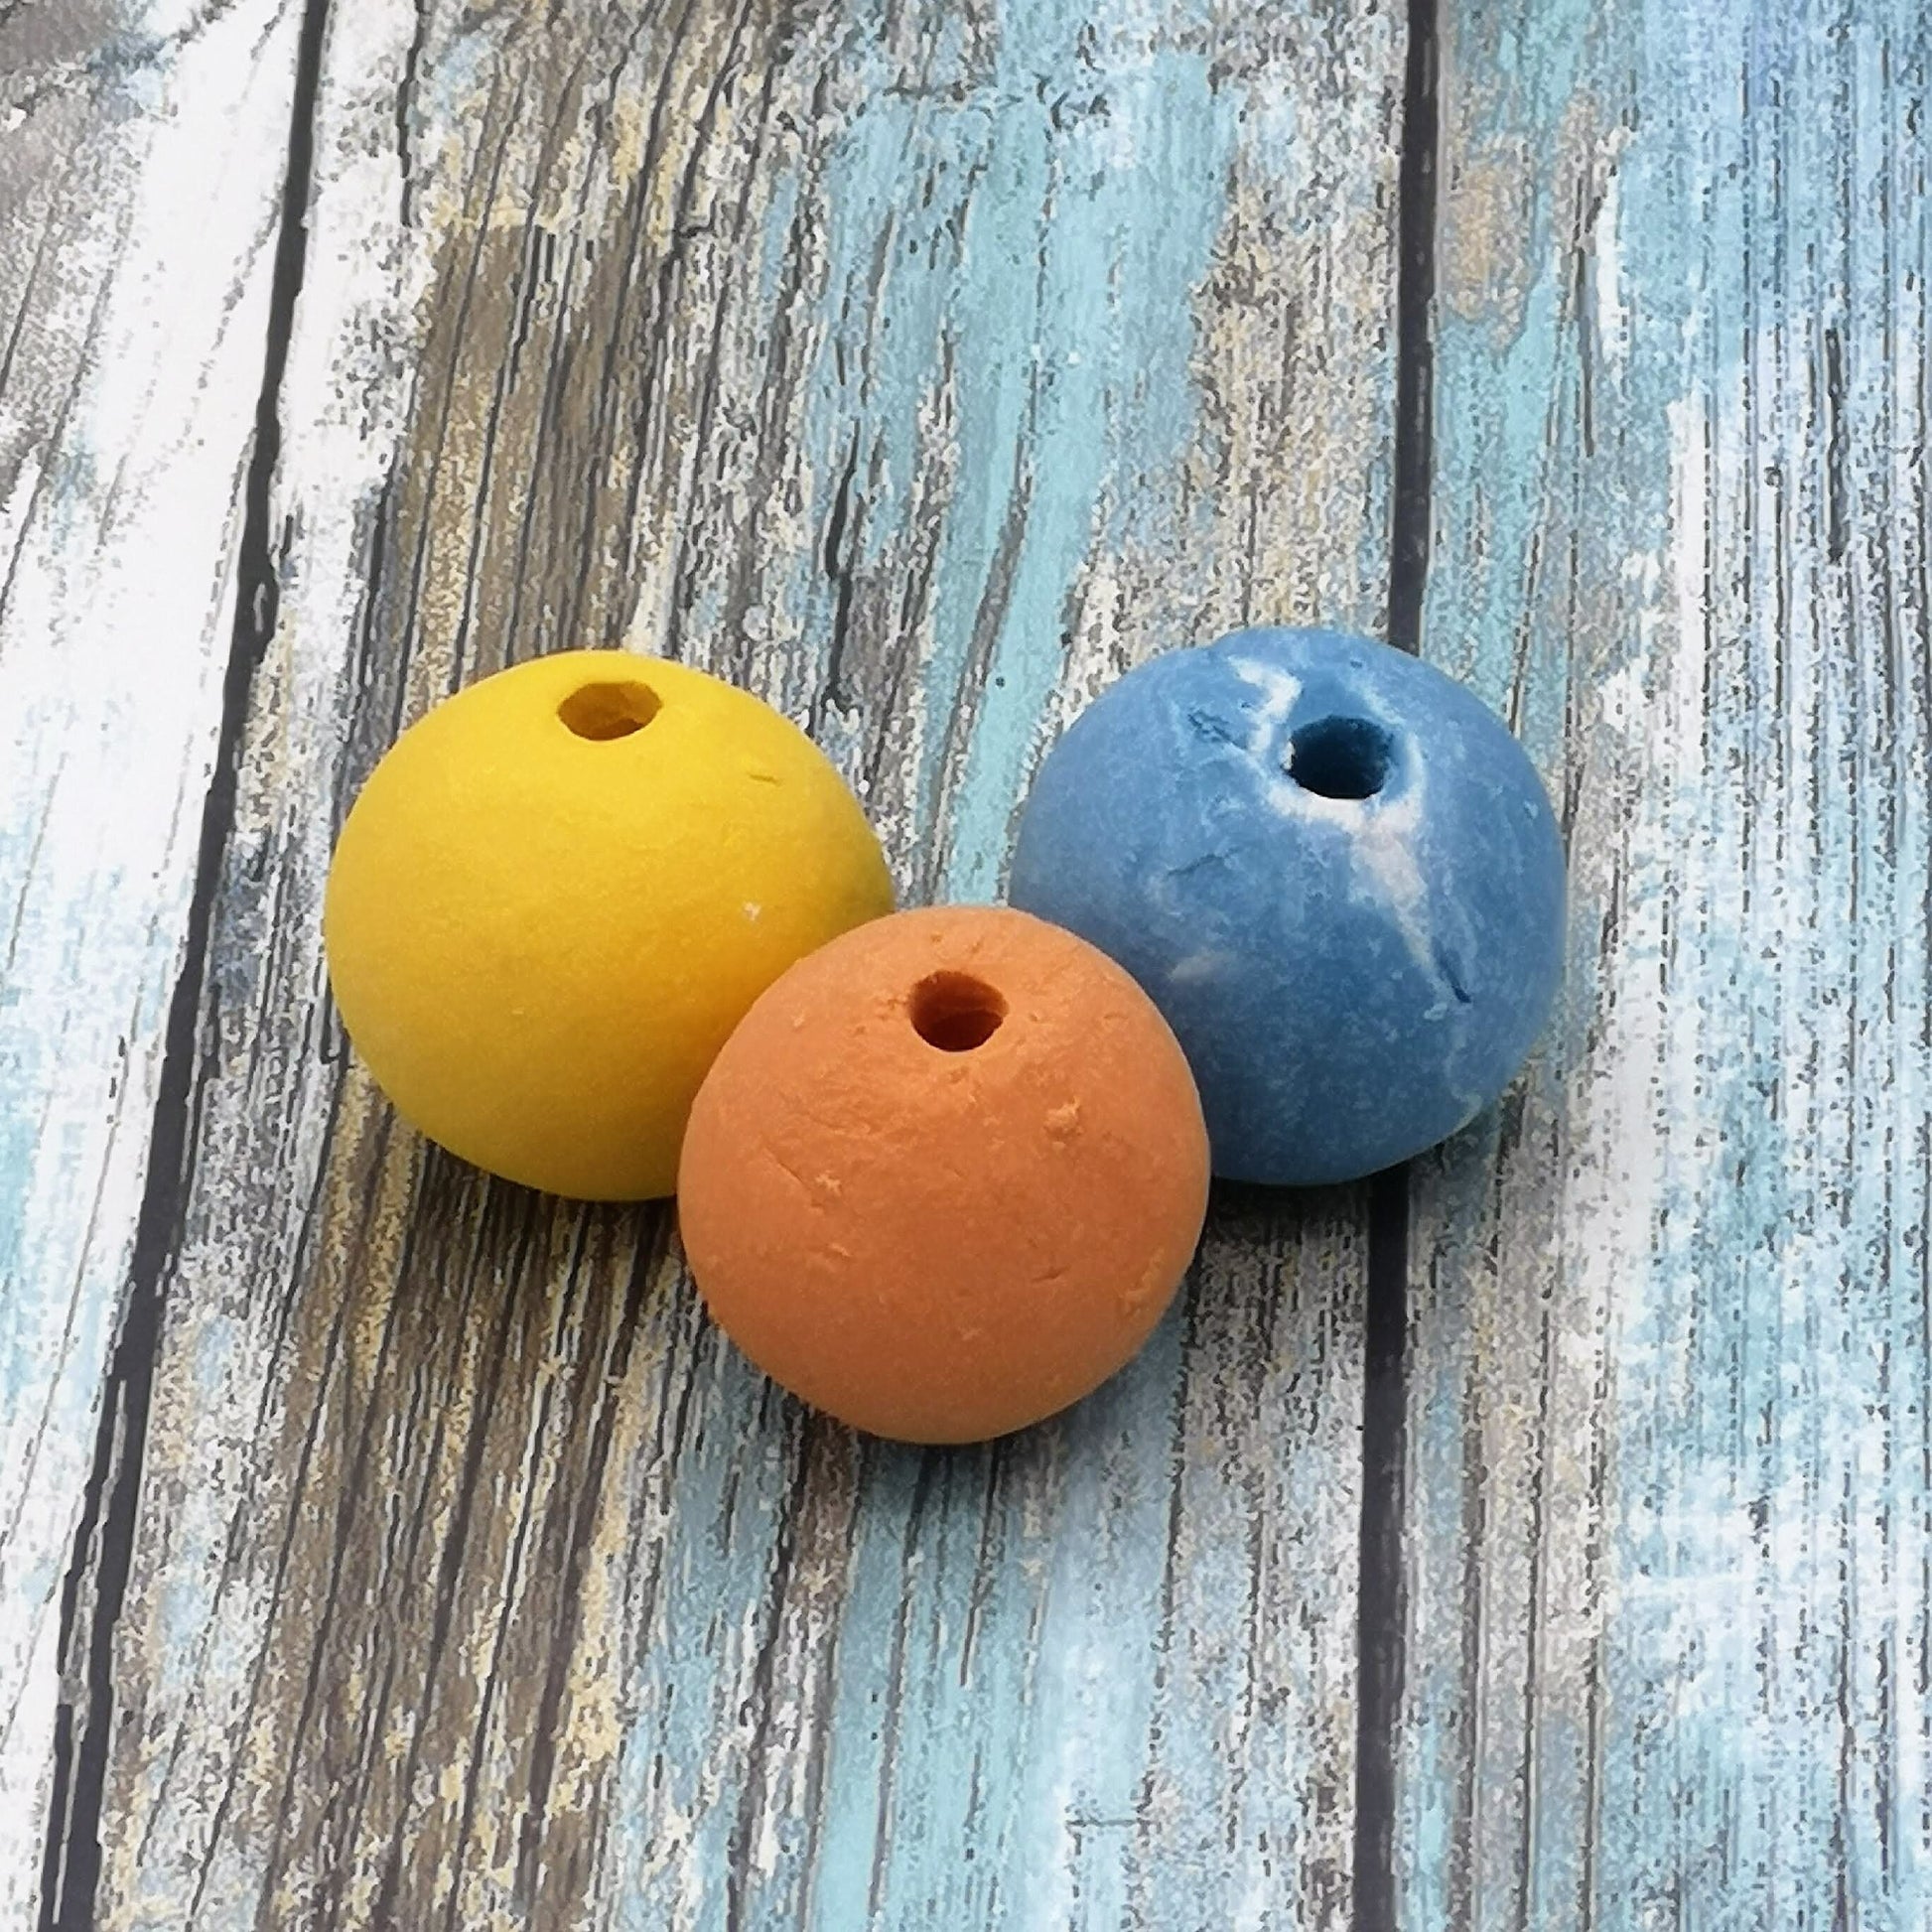 3Pc 25mm Handmade Ceramic Beads For Jewelry Making, Matte Beads For Crafts, Decorating, Macrame Beads Large Hole, Unique Mixed Clay Beads - Ceramica Ana Rafael